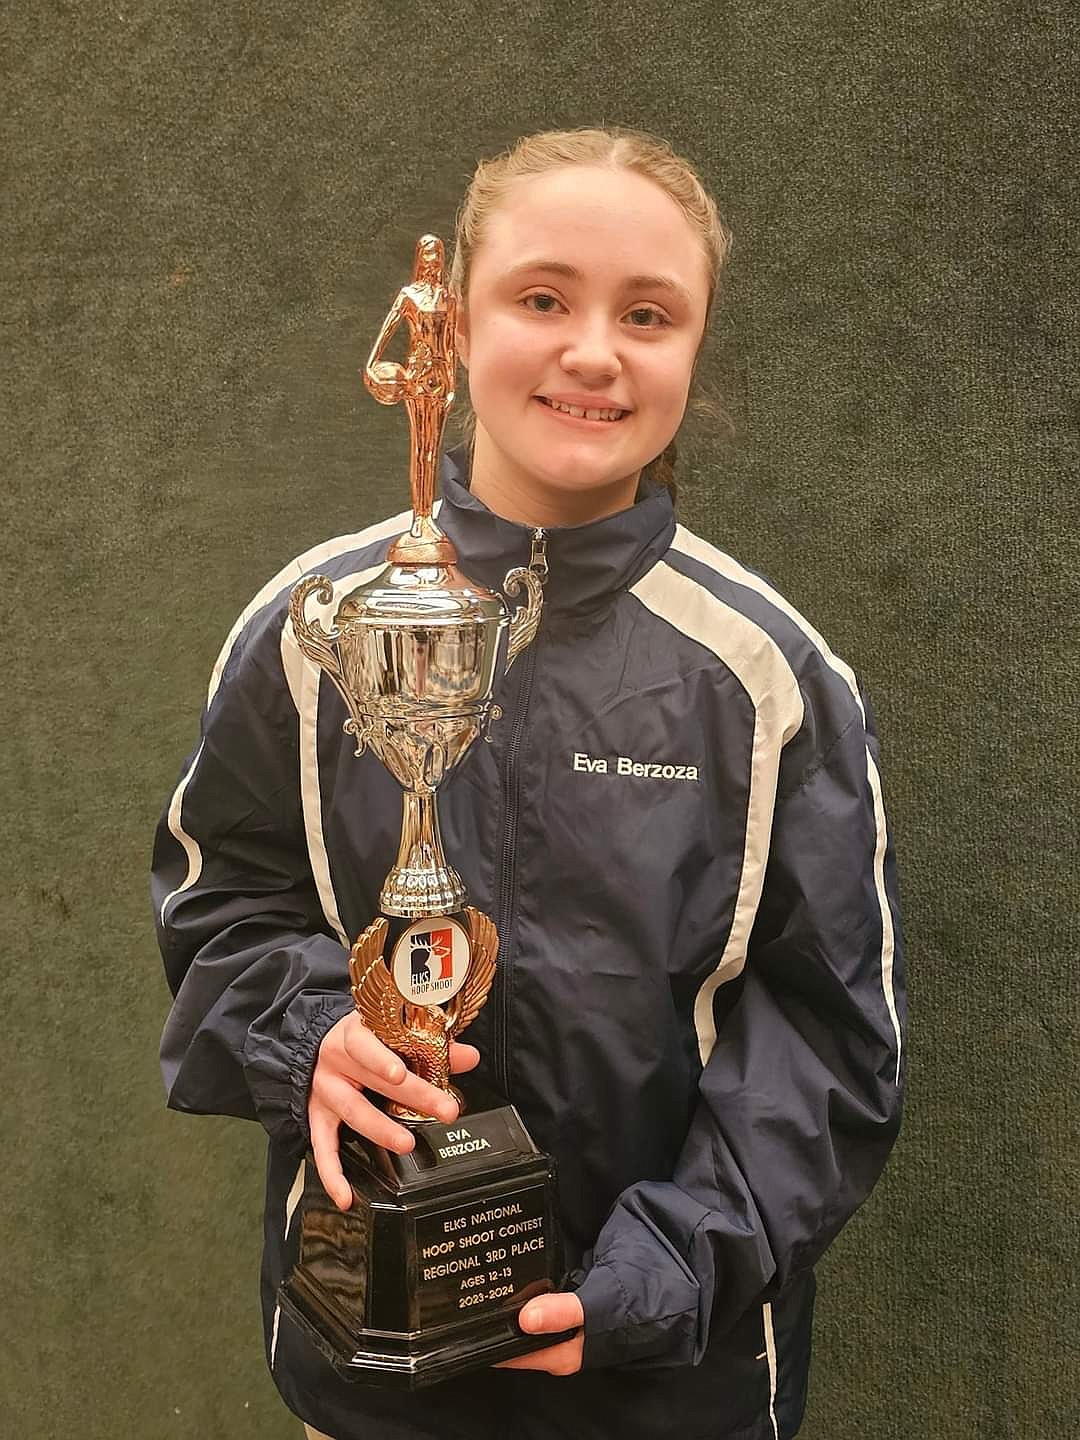 Courtesy photo
Eva Berzoza, 13, placed third in the girls age 12-13 division at the recent regional Elks Hoop Shoot at Kamiakin High in Kennewick, Wash. Eva, a seventh grader at Lakes Middle School, competed against girls from Idaho, Washington, Oregon and Alaska at regionals.